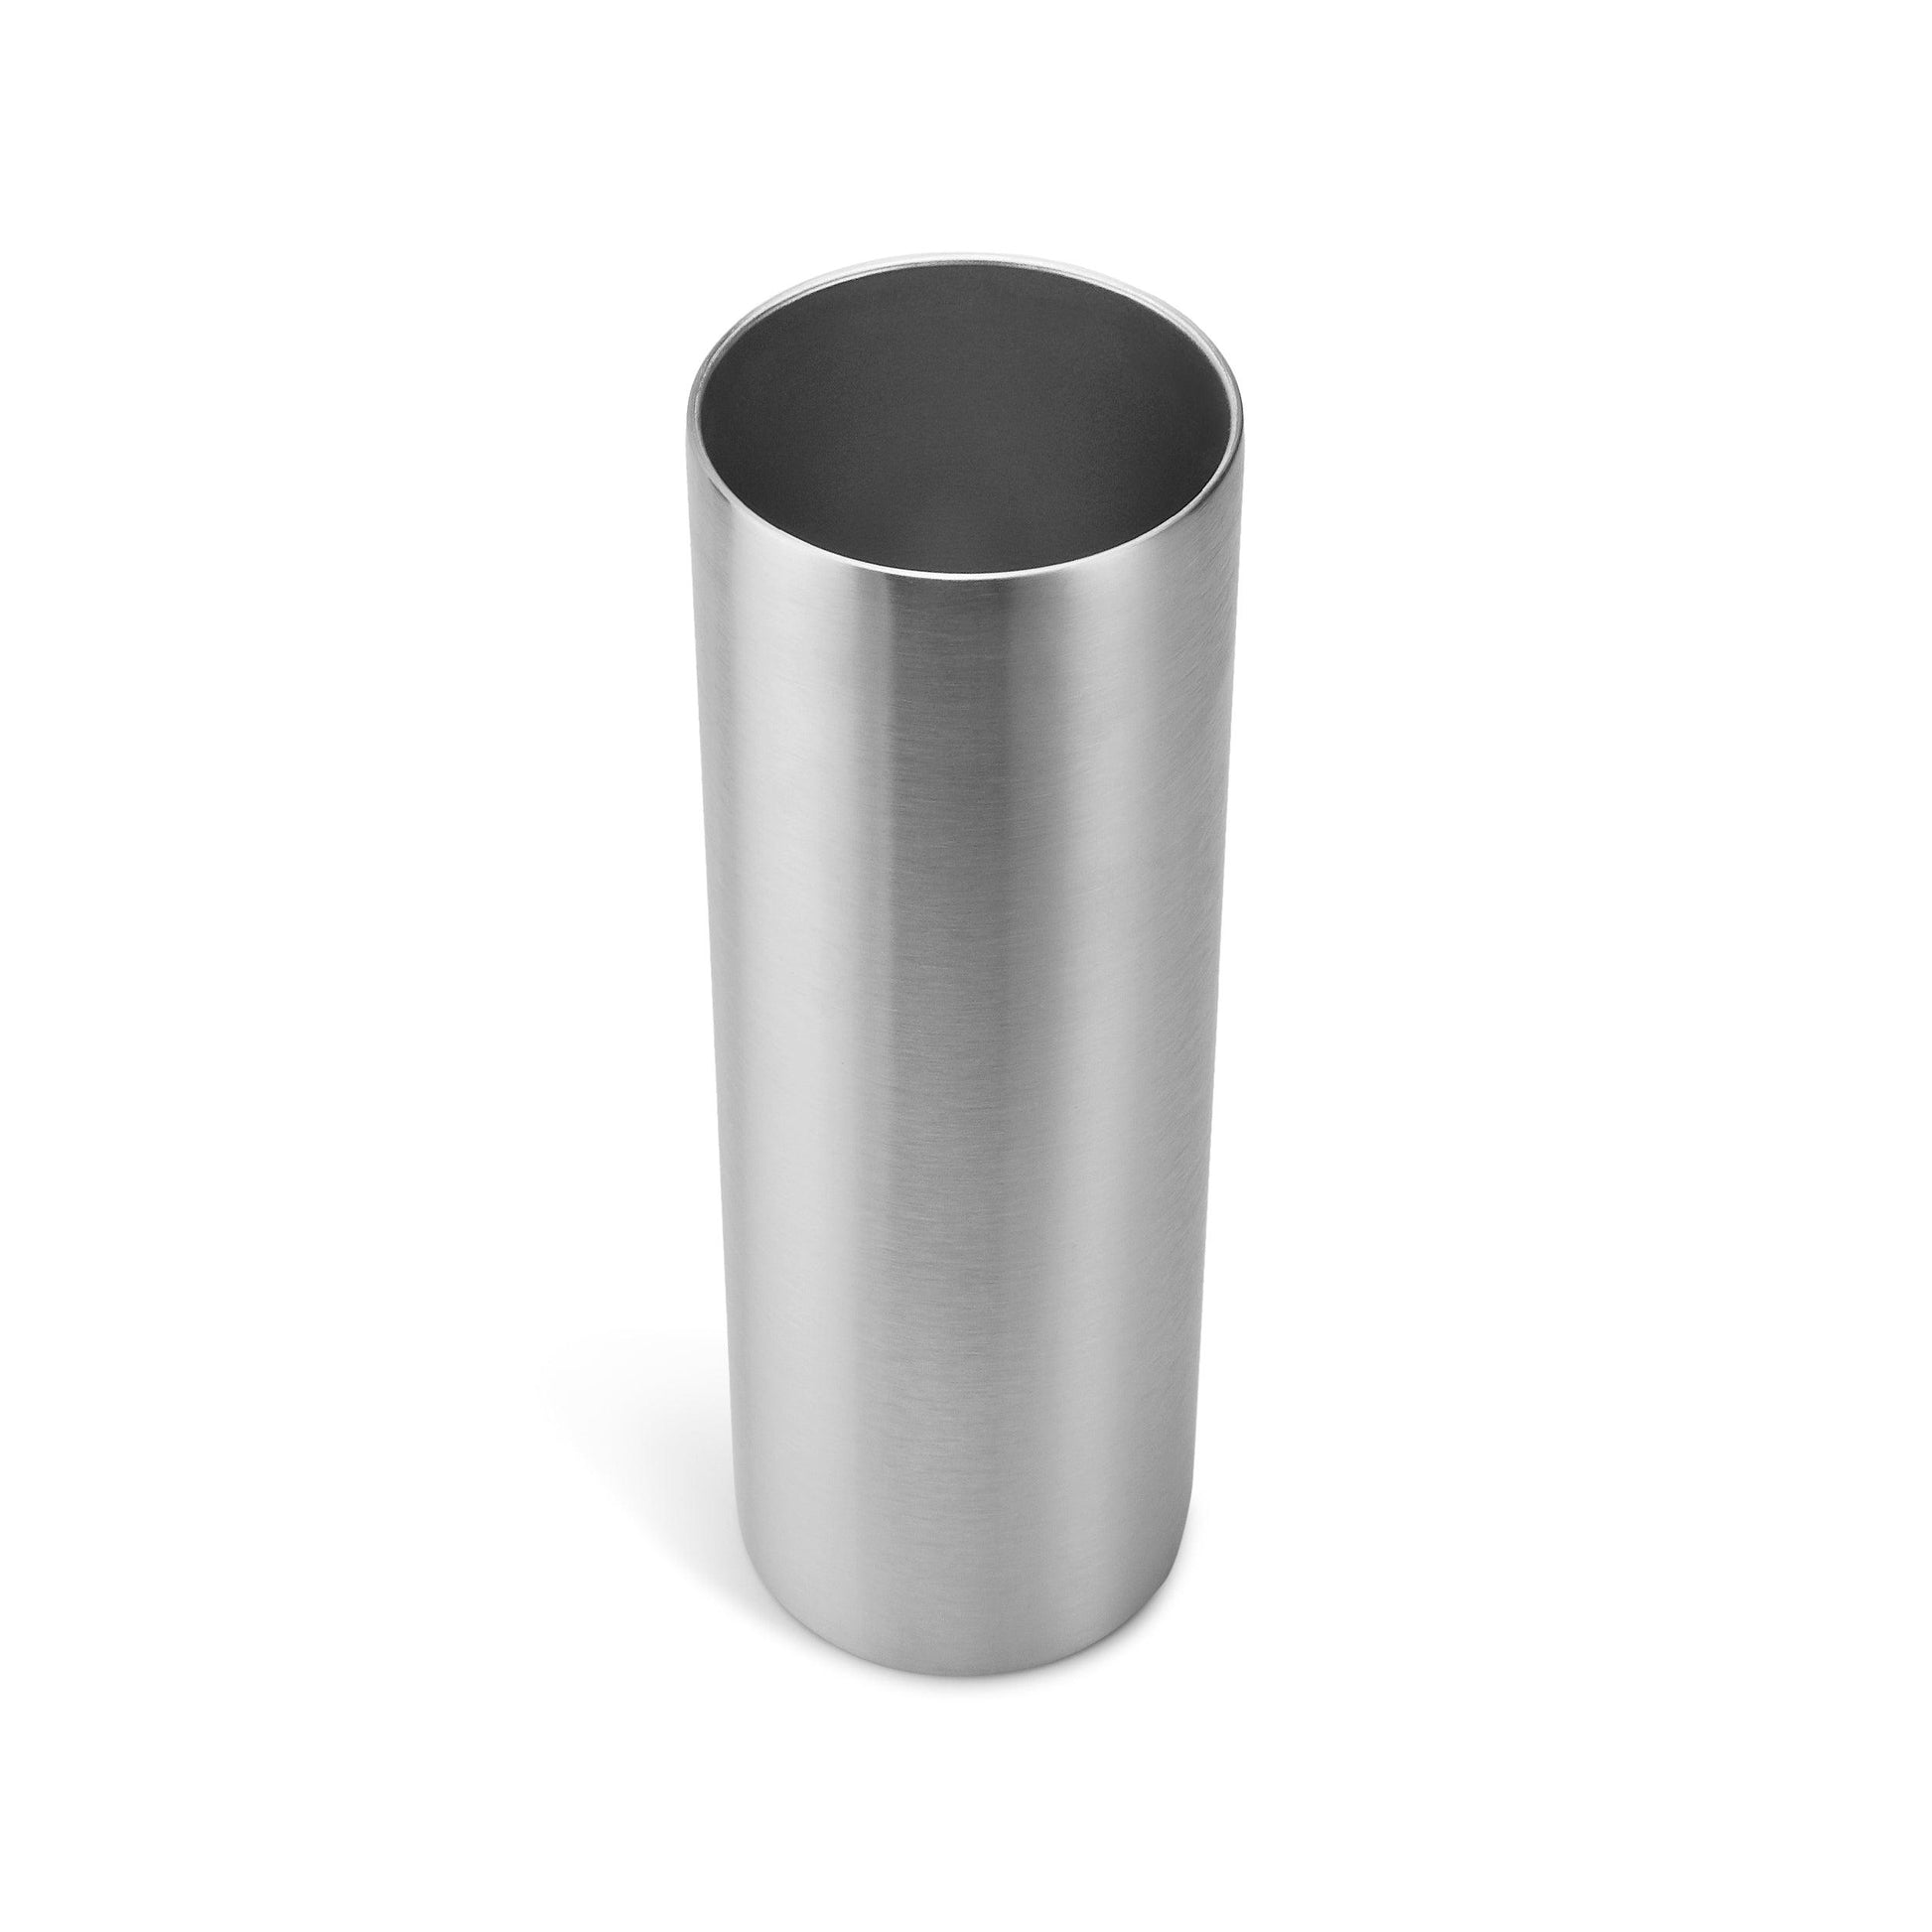 MakerFlo 30 oz Rimless Stainless Steel Insulated Travel Tumbler, Silver, 1 PC